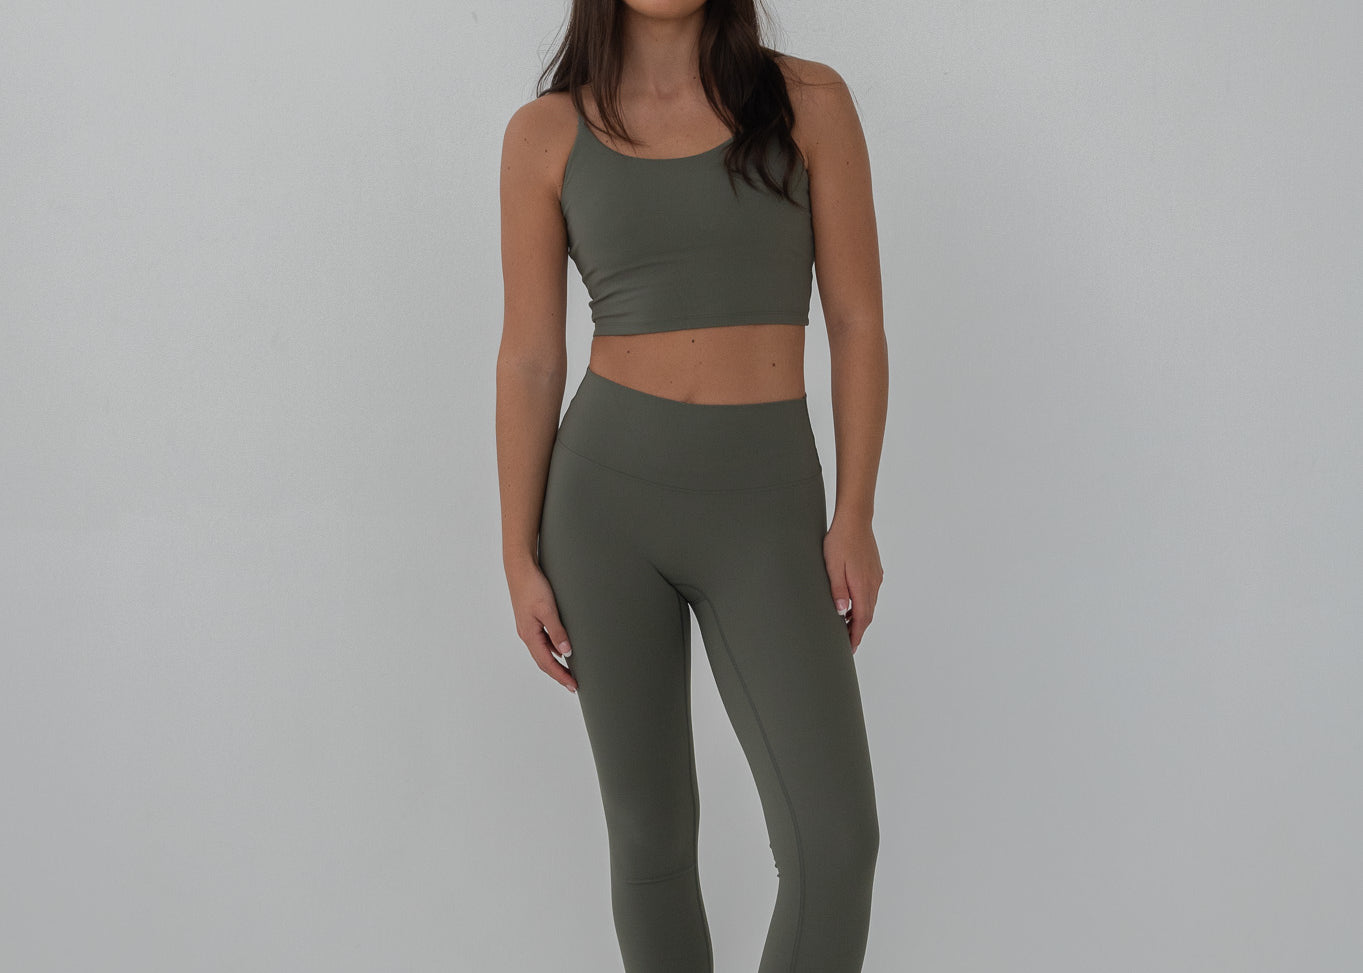 Aerie army green leggings size small cropped sports yoga pants